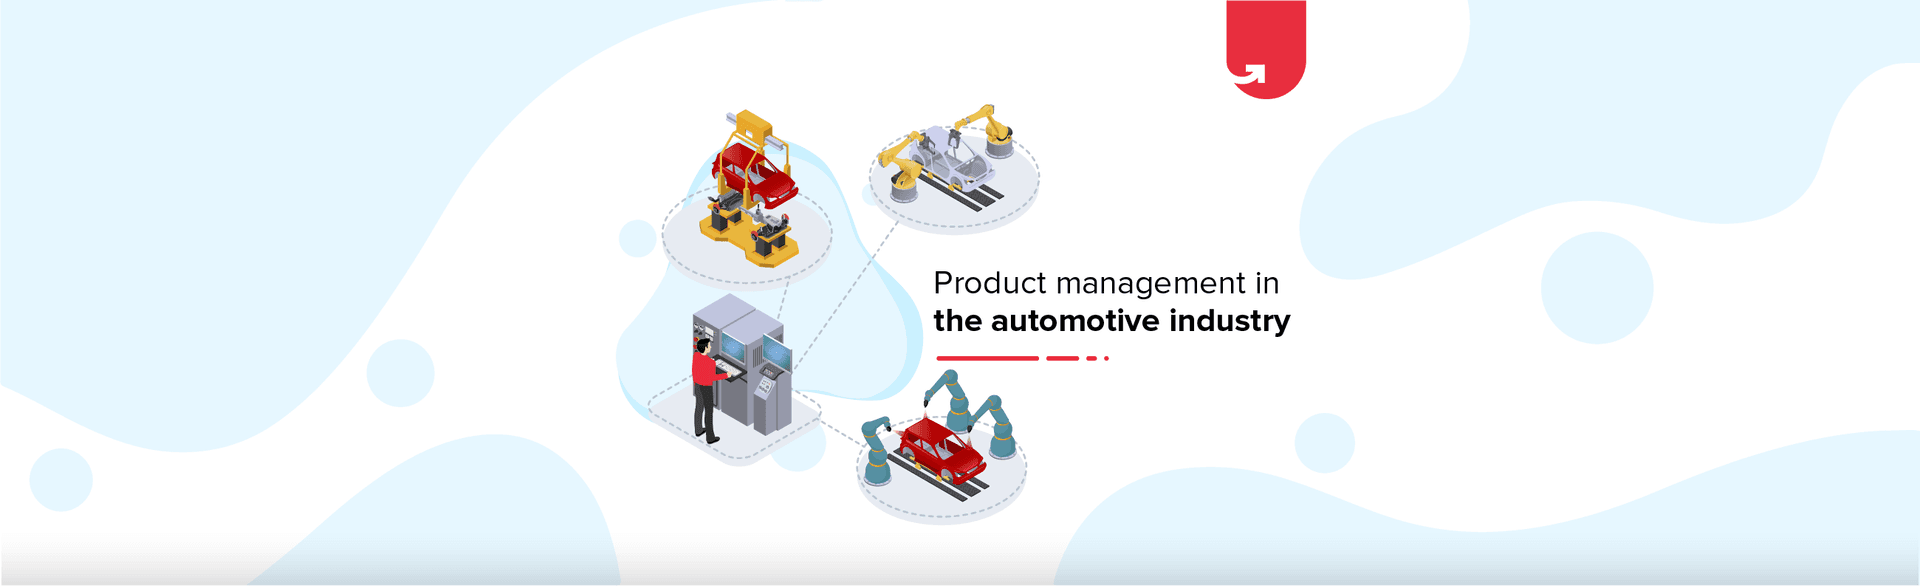 Product Management in Automotive Industry: Process, Competition, Integration &#038; Monitoring